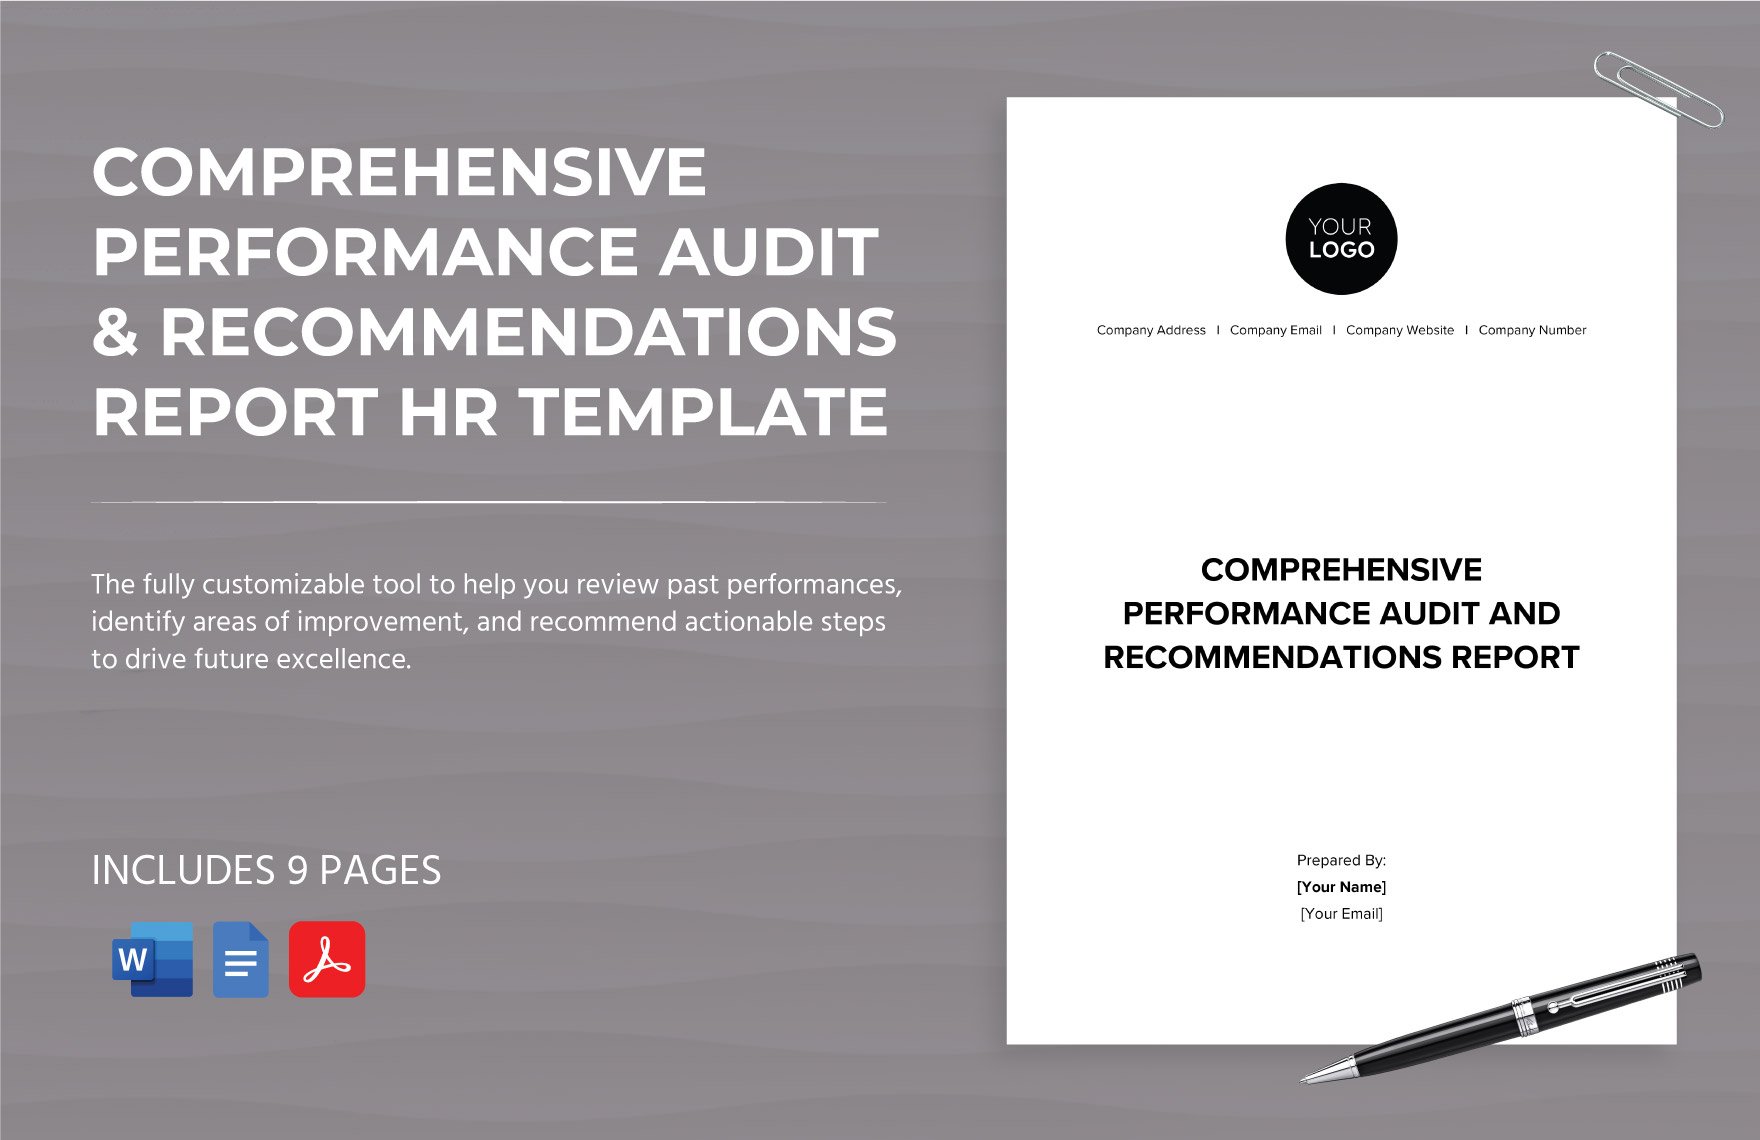 Comprehensive Performance Audit & Recommendations Report HR Template